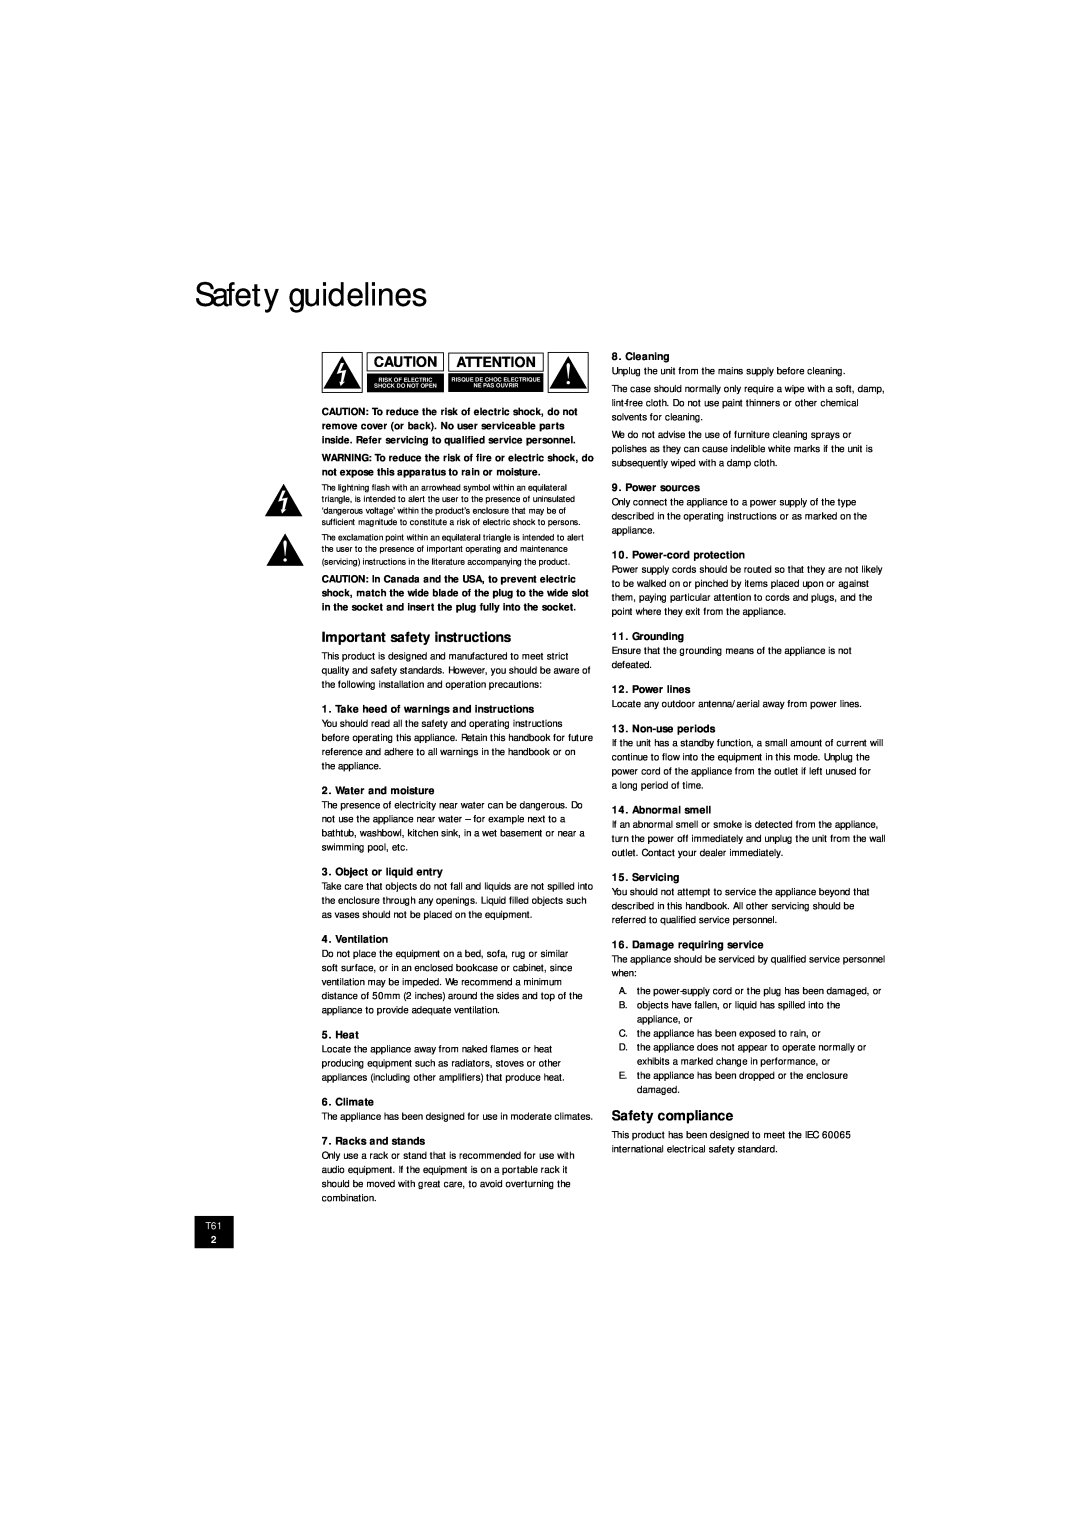 Arcam T61 manual Safety guidelines, Important safety instructions, Safety compliance 